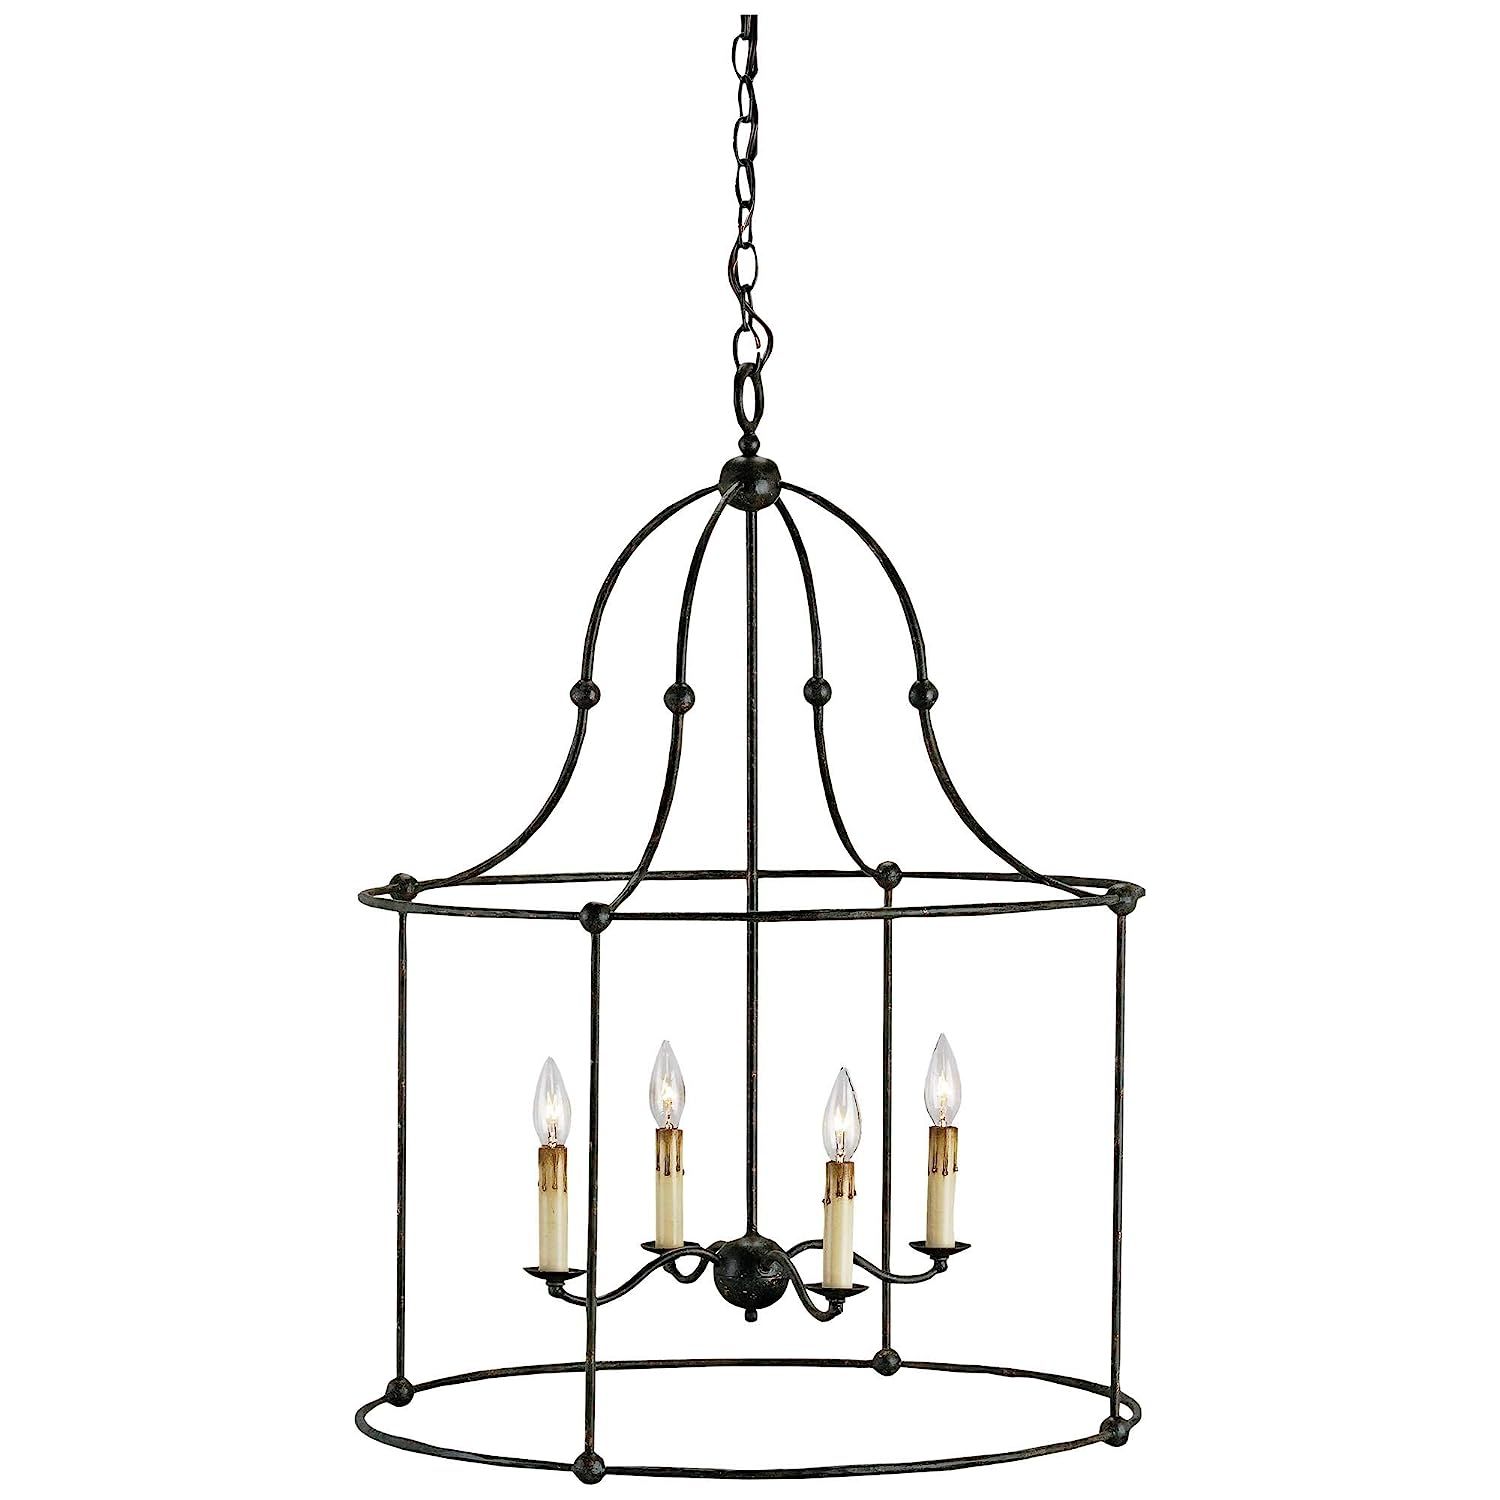 Currey and Company 9160 Fitzjames - Four Light Hanging Lantern, Mayfair Finish | Amazon (US)